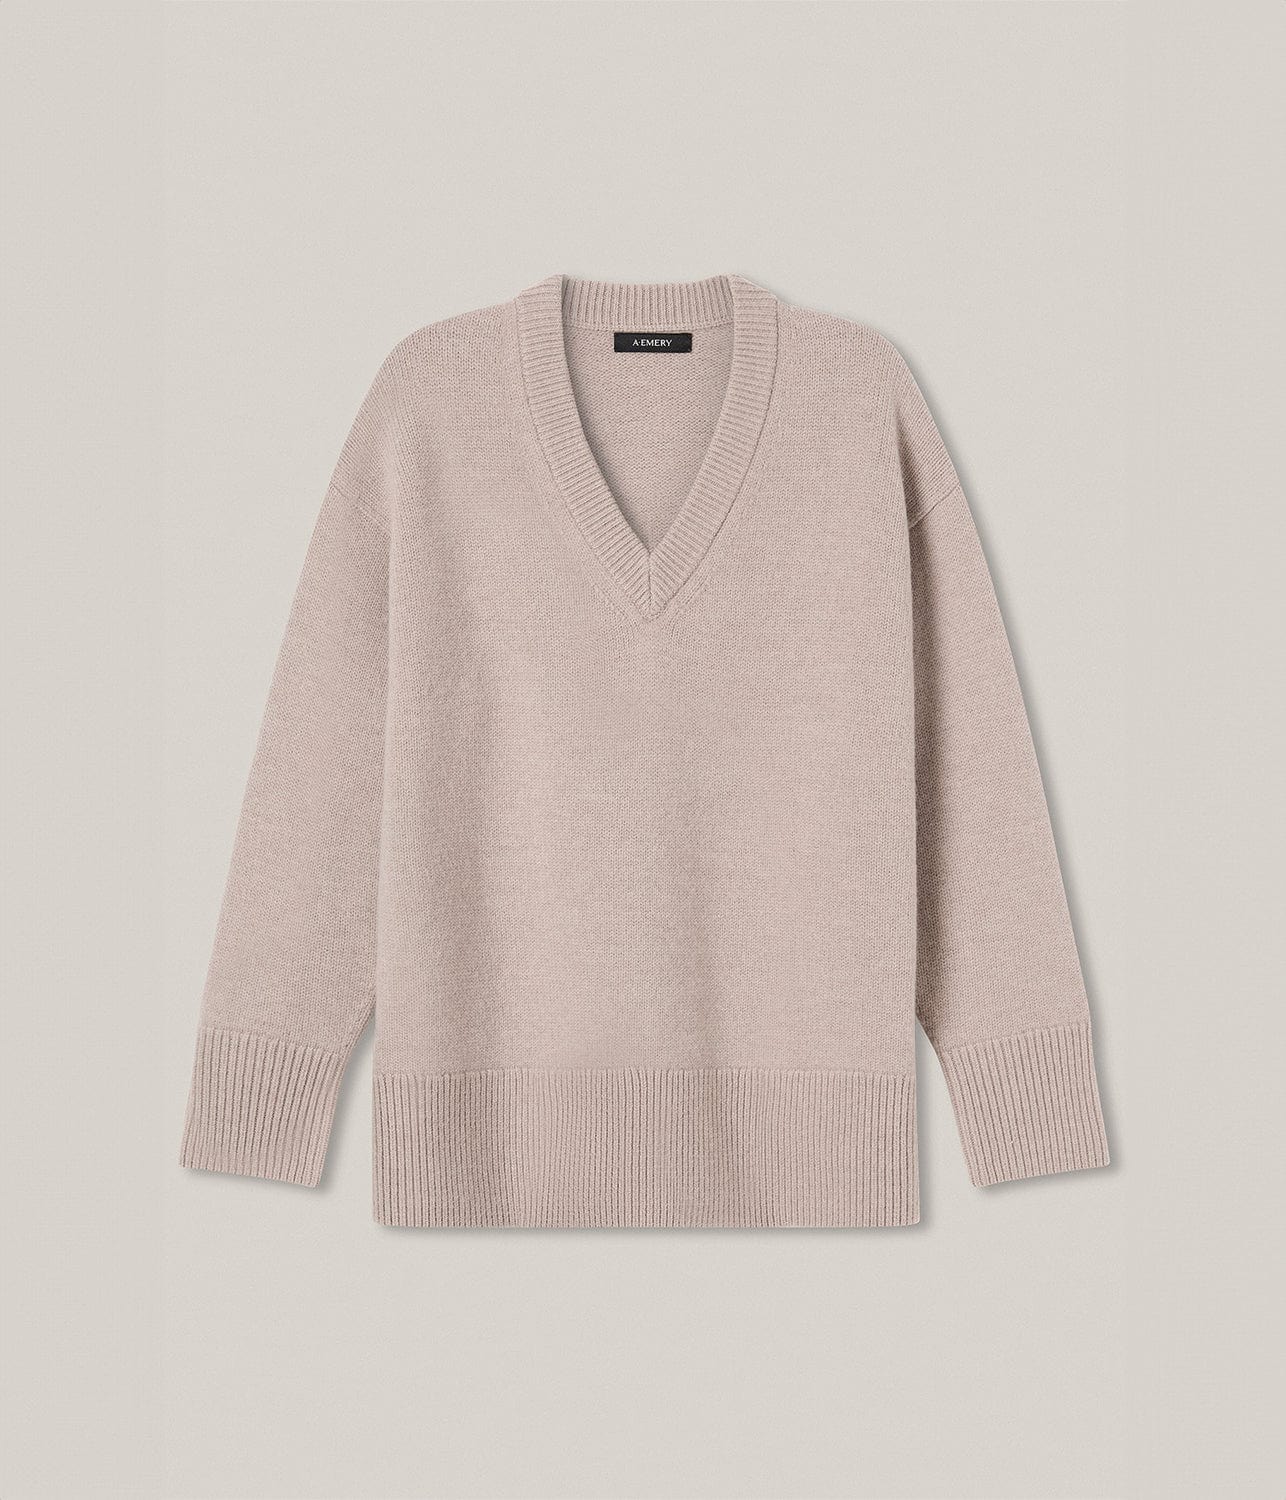 THE LEWIS KNIT- ALMOND MELANGE | A.EMERY | A.EMERY THE LEWIS KNIT- ALMOND MELANGE